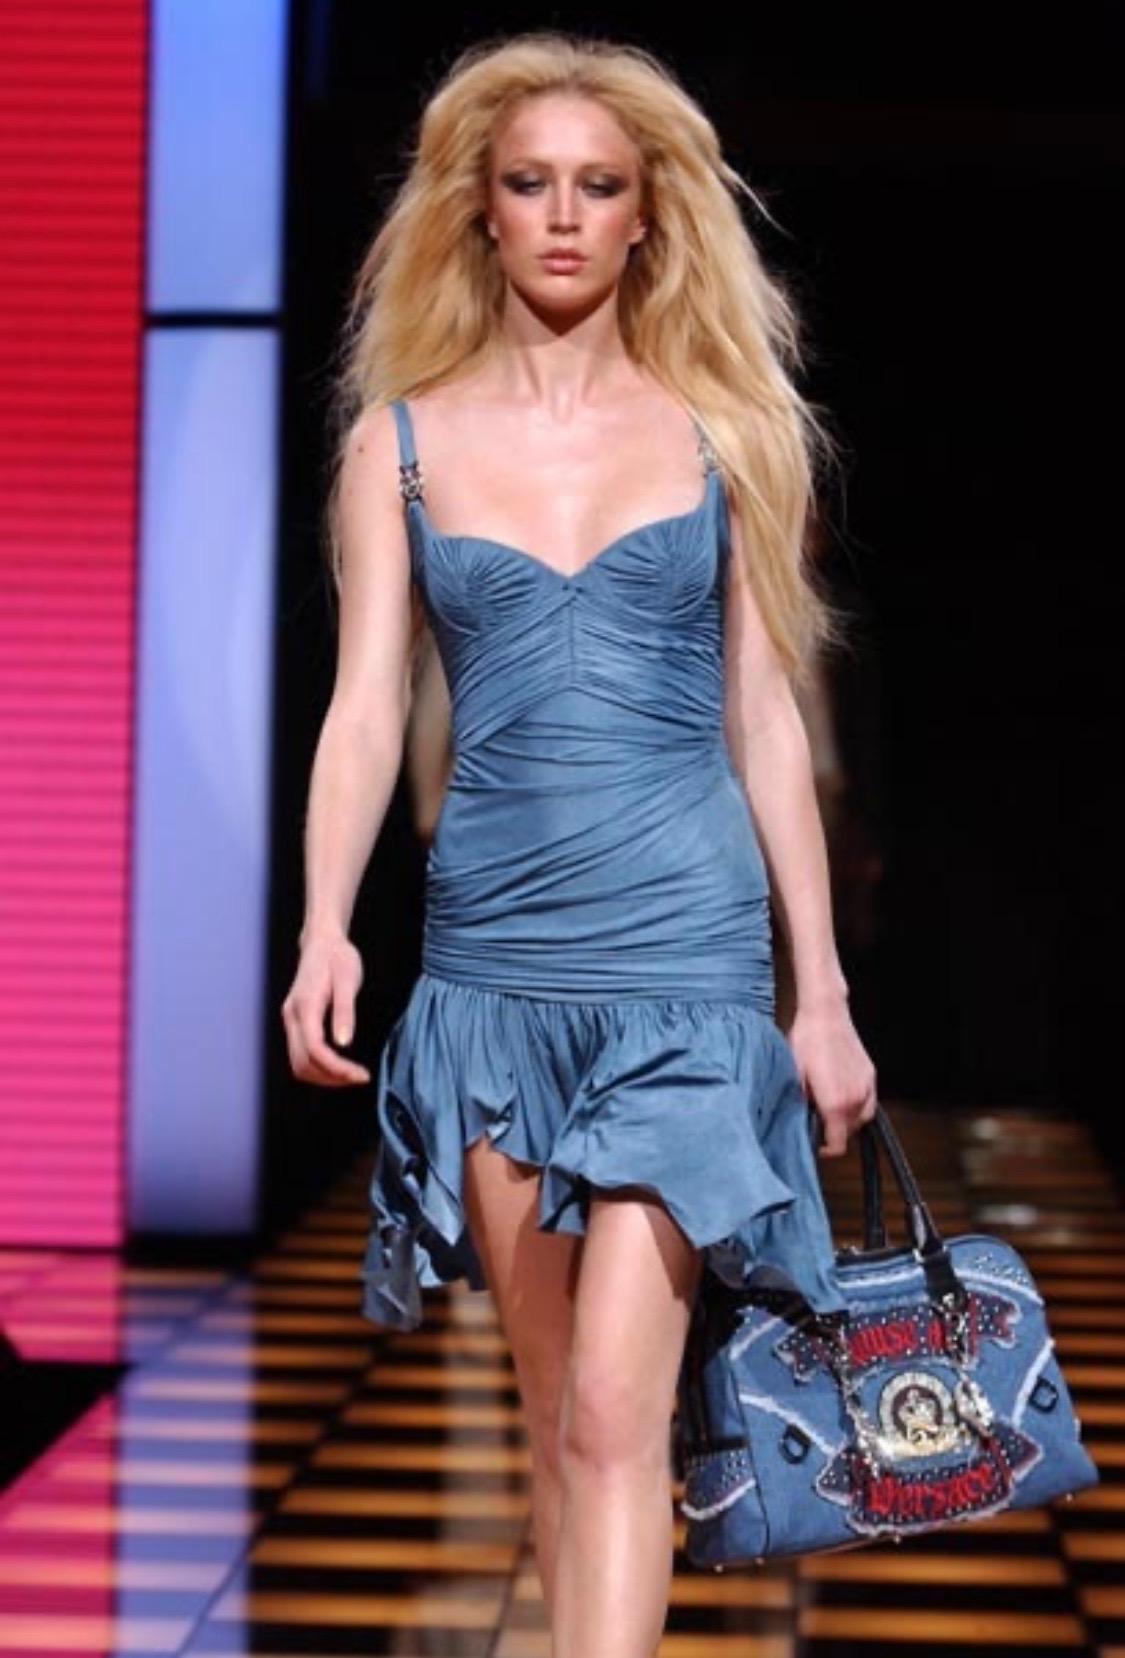 Black S/S 2005 Versace by Donatella Versace Chaos Couture Denim Bag Runway For Sale